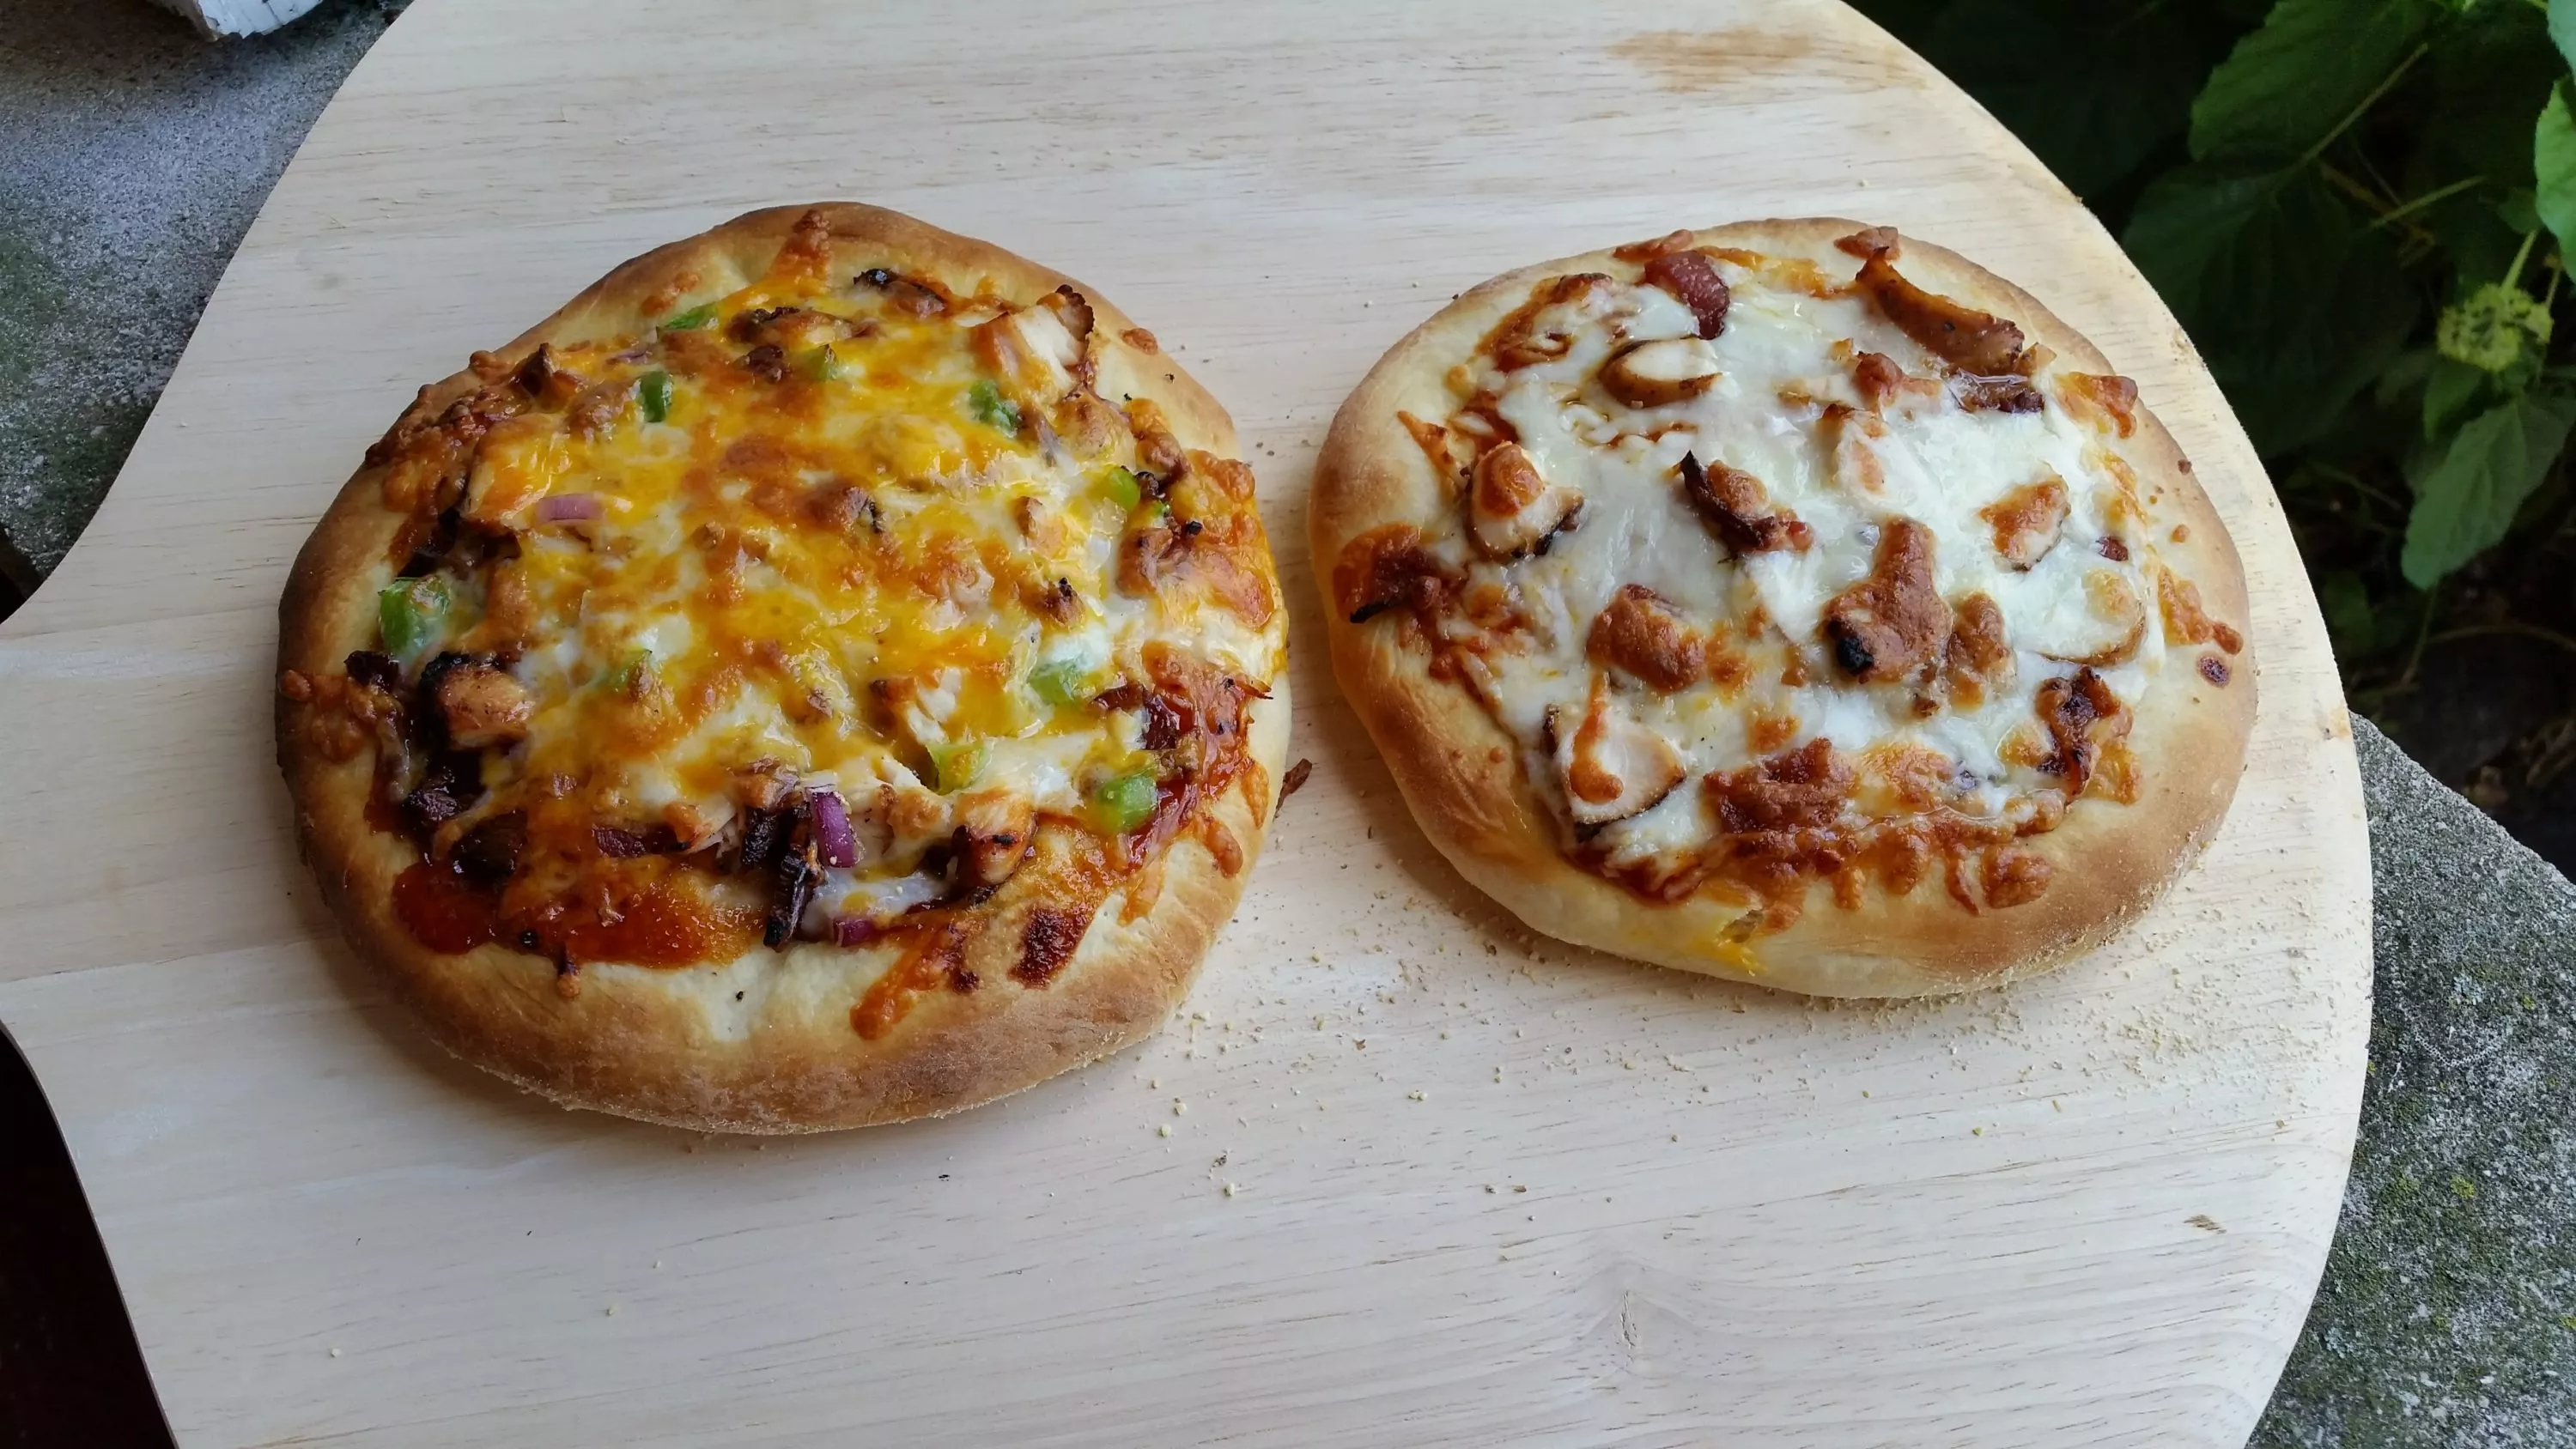 Personal-Size, Grilled, Homemade Pizzas